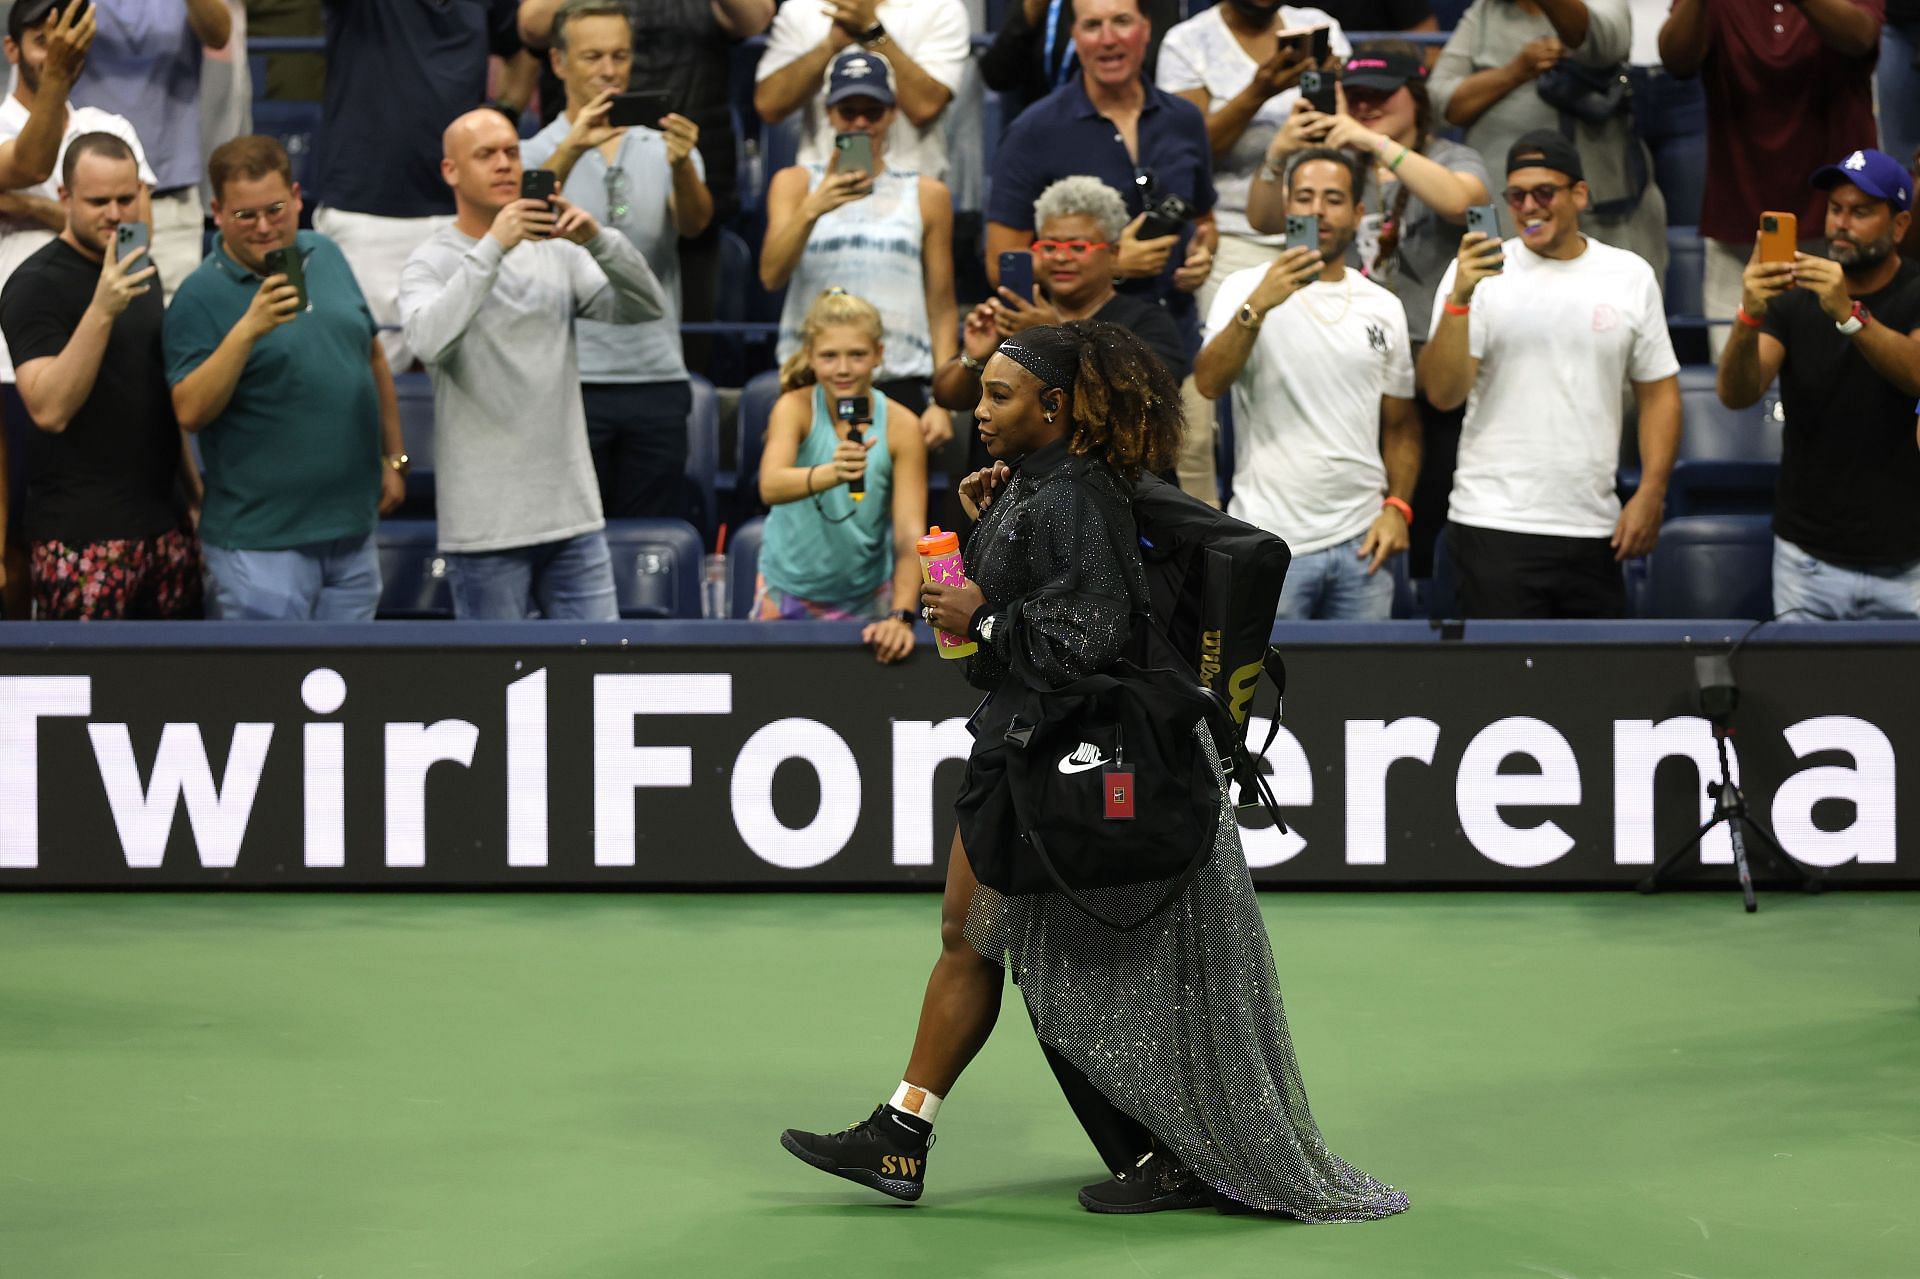 Serena Williams walking on to the court on Monday